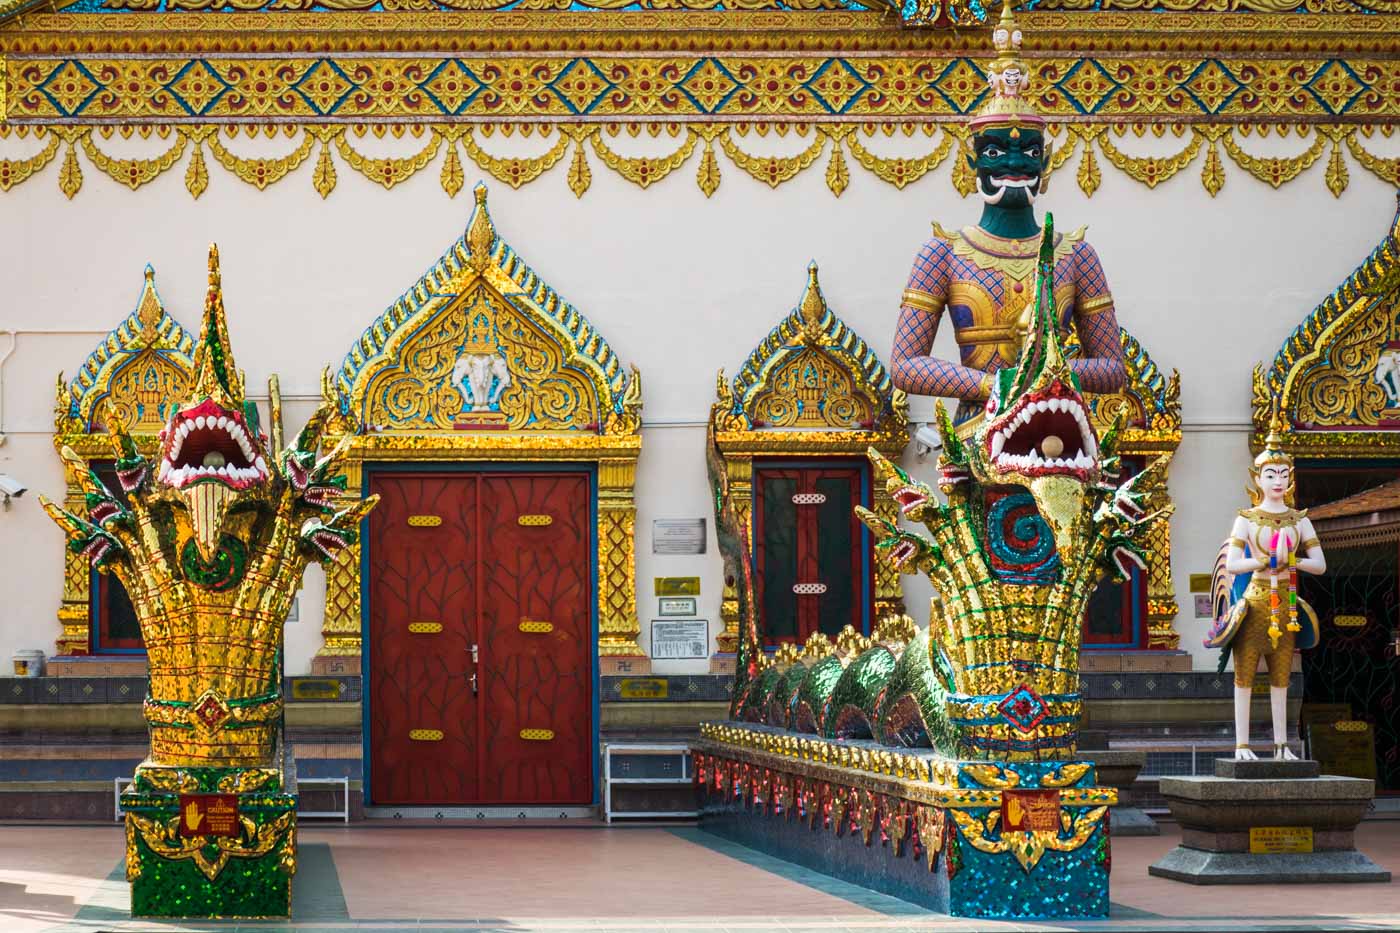 The entrance of a Buddhist temple with detailed art and ornaments in front